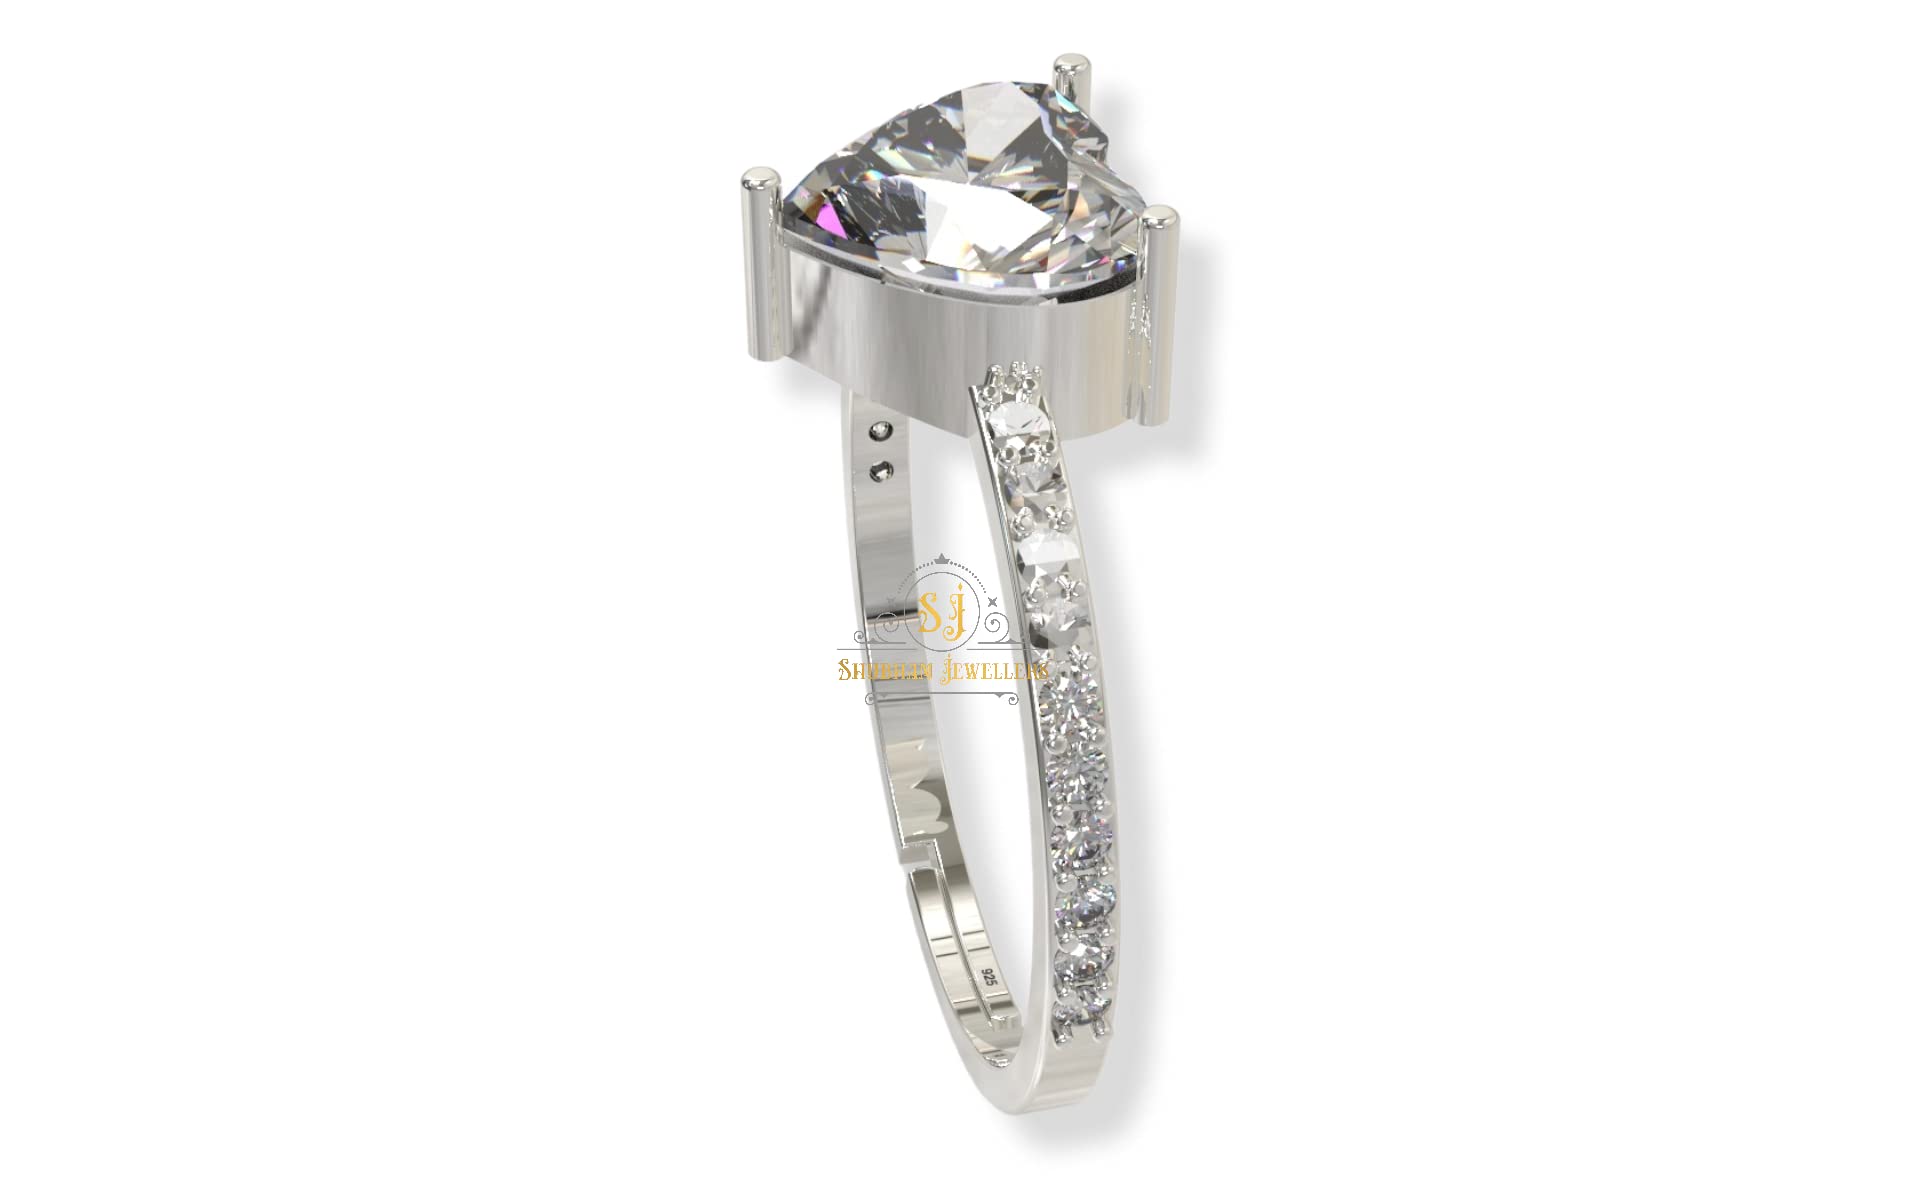 SJ SHUBHAM JEWELLERS™ 925 Sterling Silver Three Briliant Cut Design Adjustable Finger Ring with White CZ diamond for Women and Girls, Anniversary Gift for Wife, Valentine - JewelYaari By Shubham Jewellers